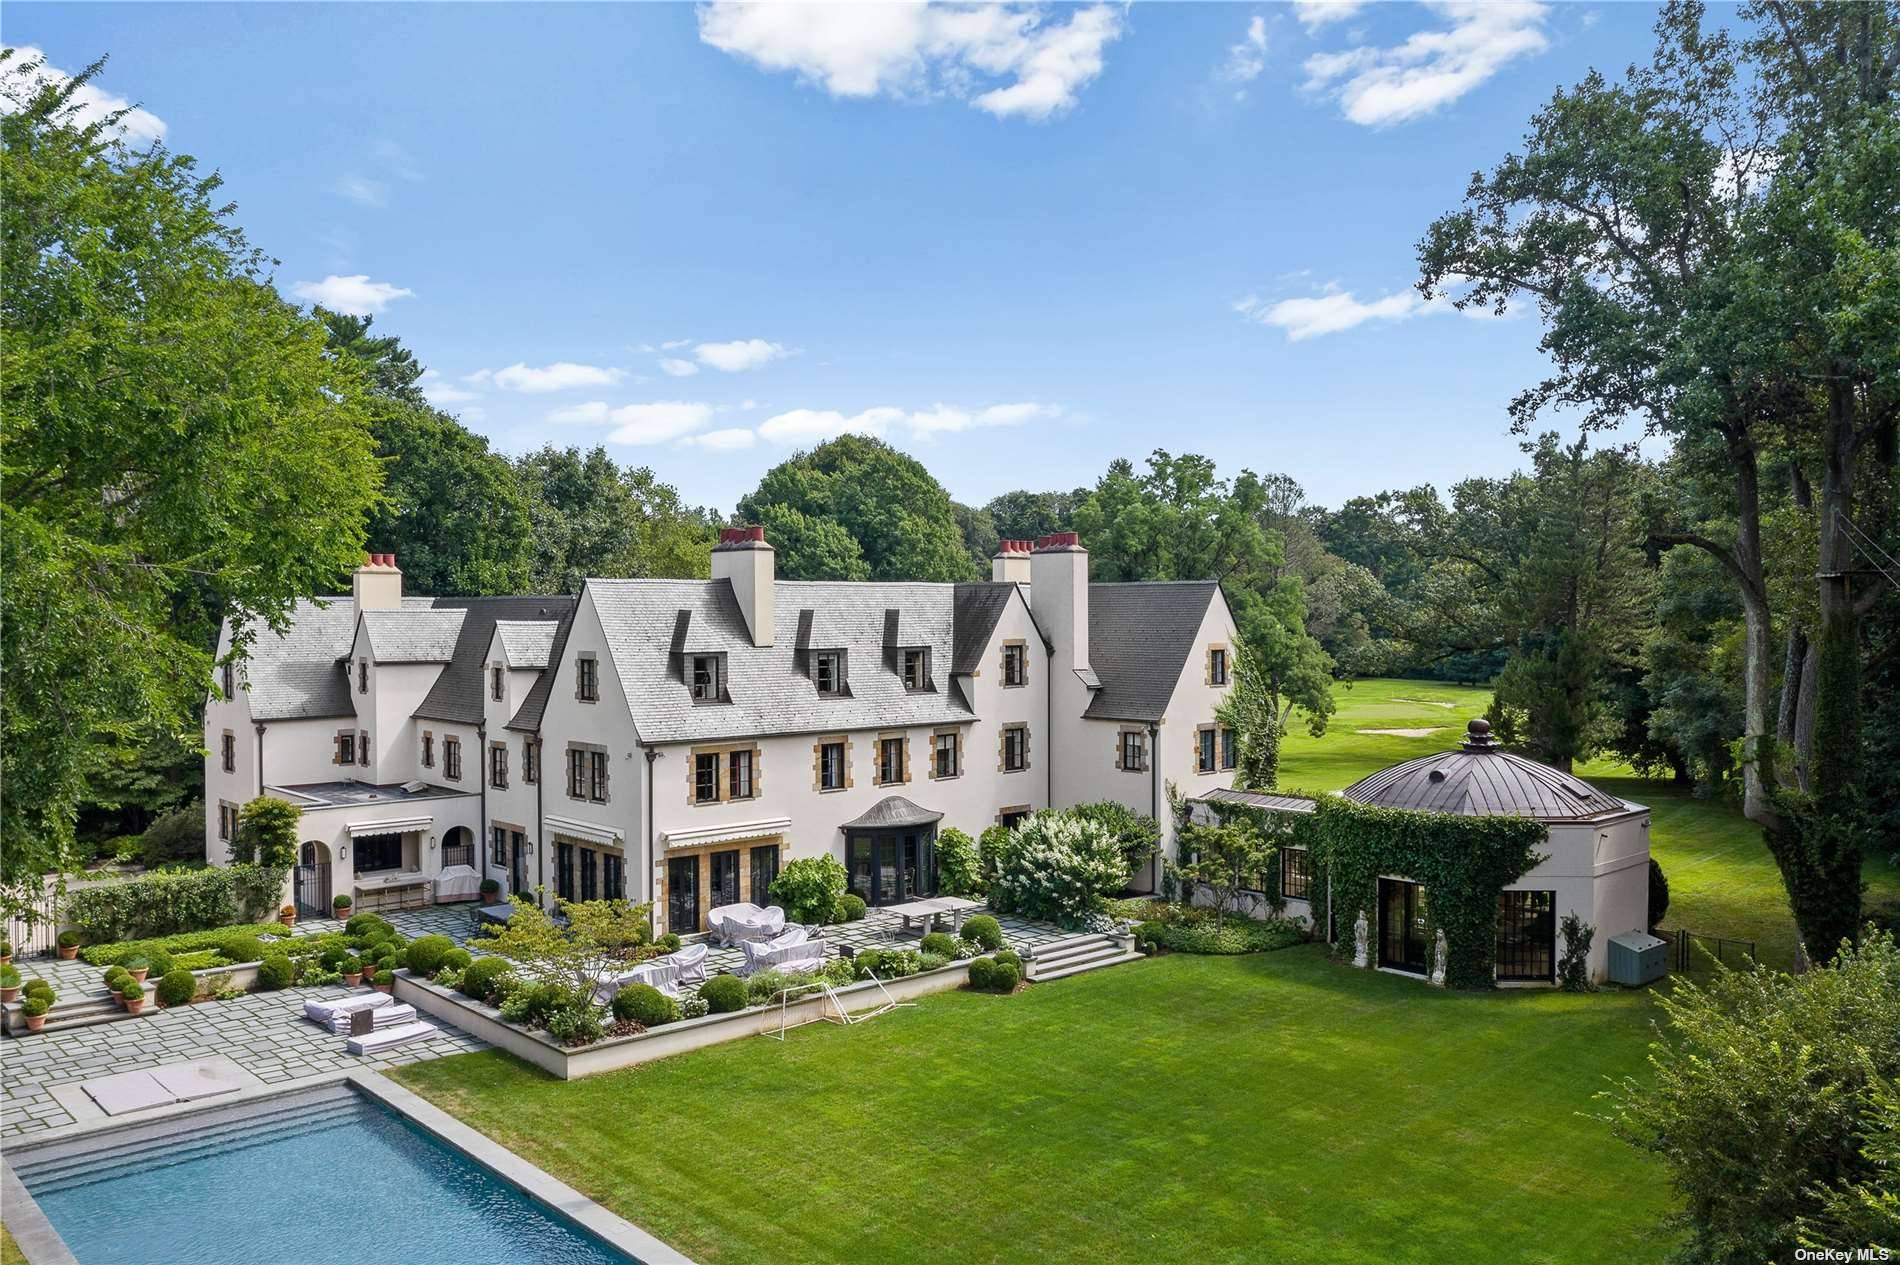 Located in the prestigious Village of Matinecock, this Historic 1926 French Normandy on 6 Prime Acres originally built for J.